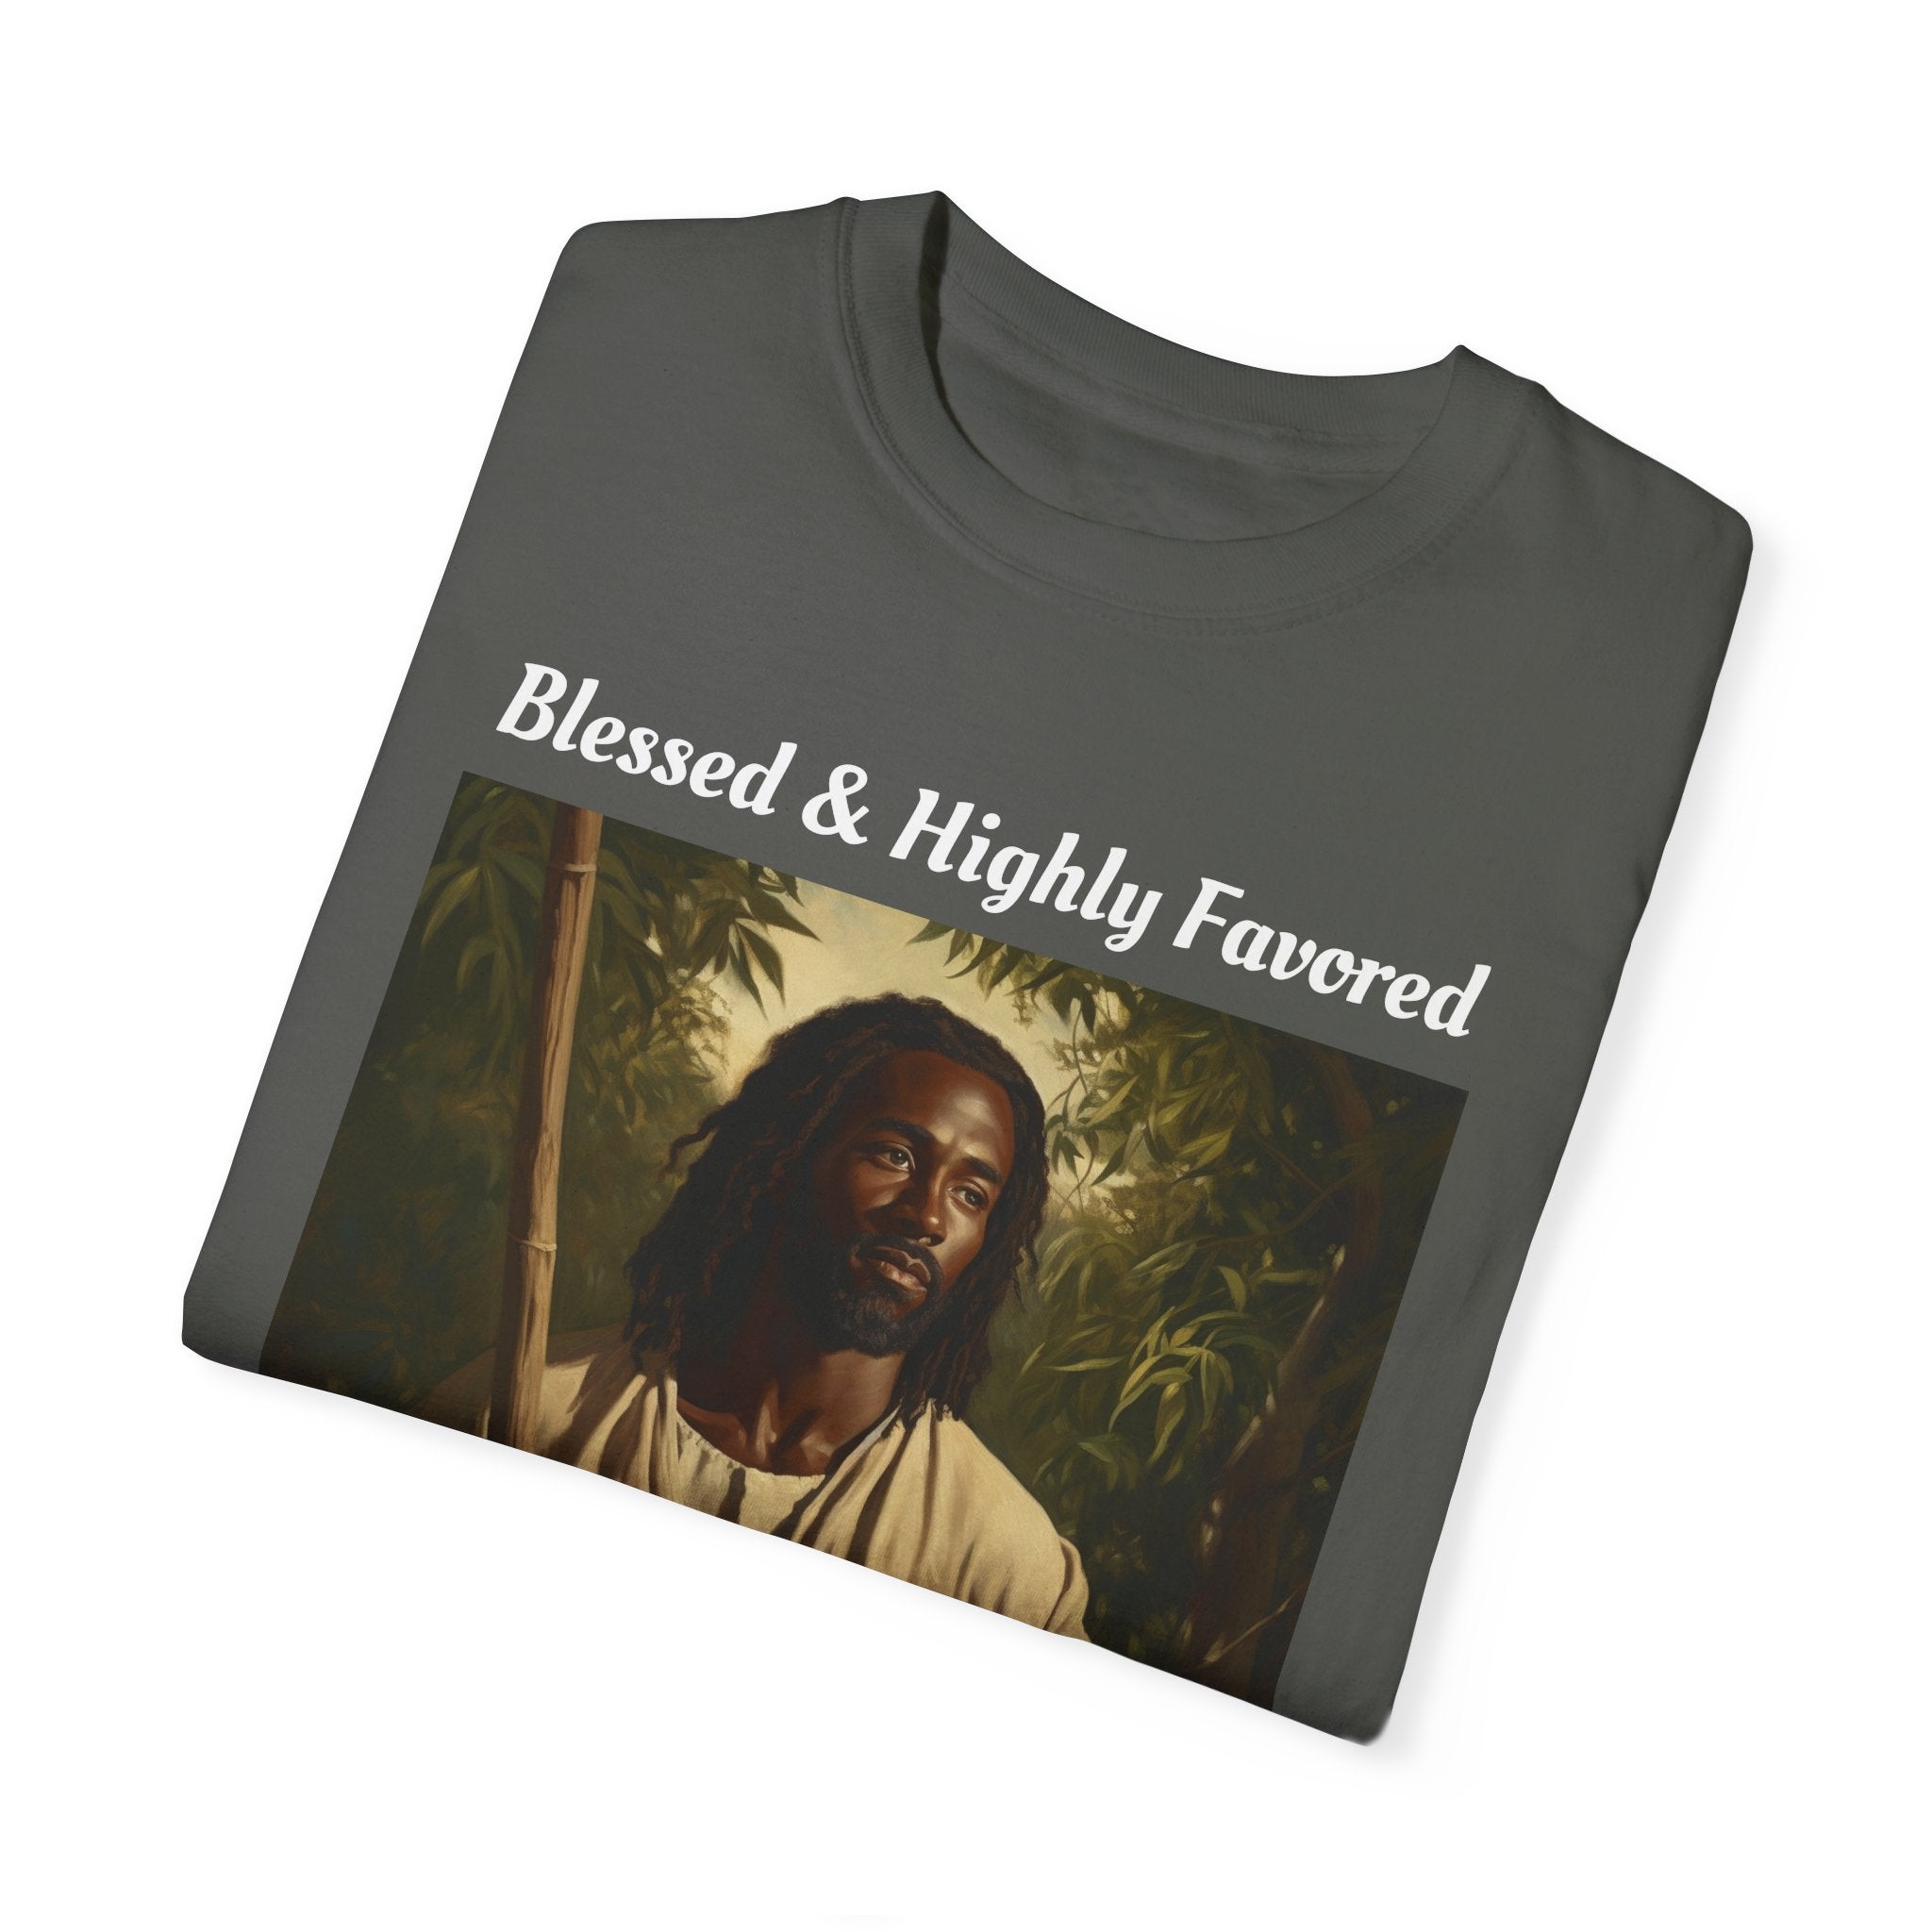 "Blessed and Highly Favored" Unisex Garment-Dyed T-shirt - Embrace Spiritual Gratitude with Stylish, Faith-Inspired Comfort Wear Gift